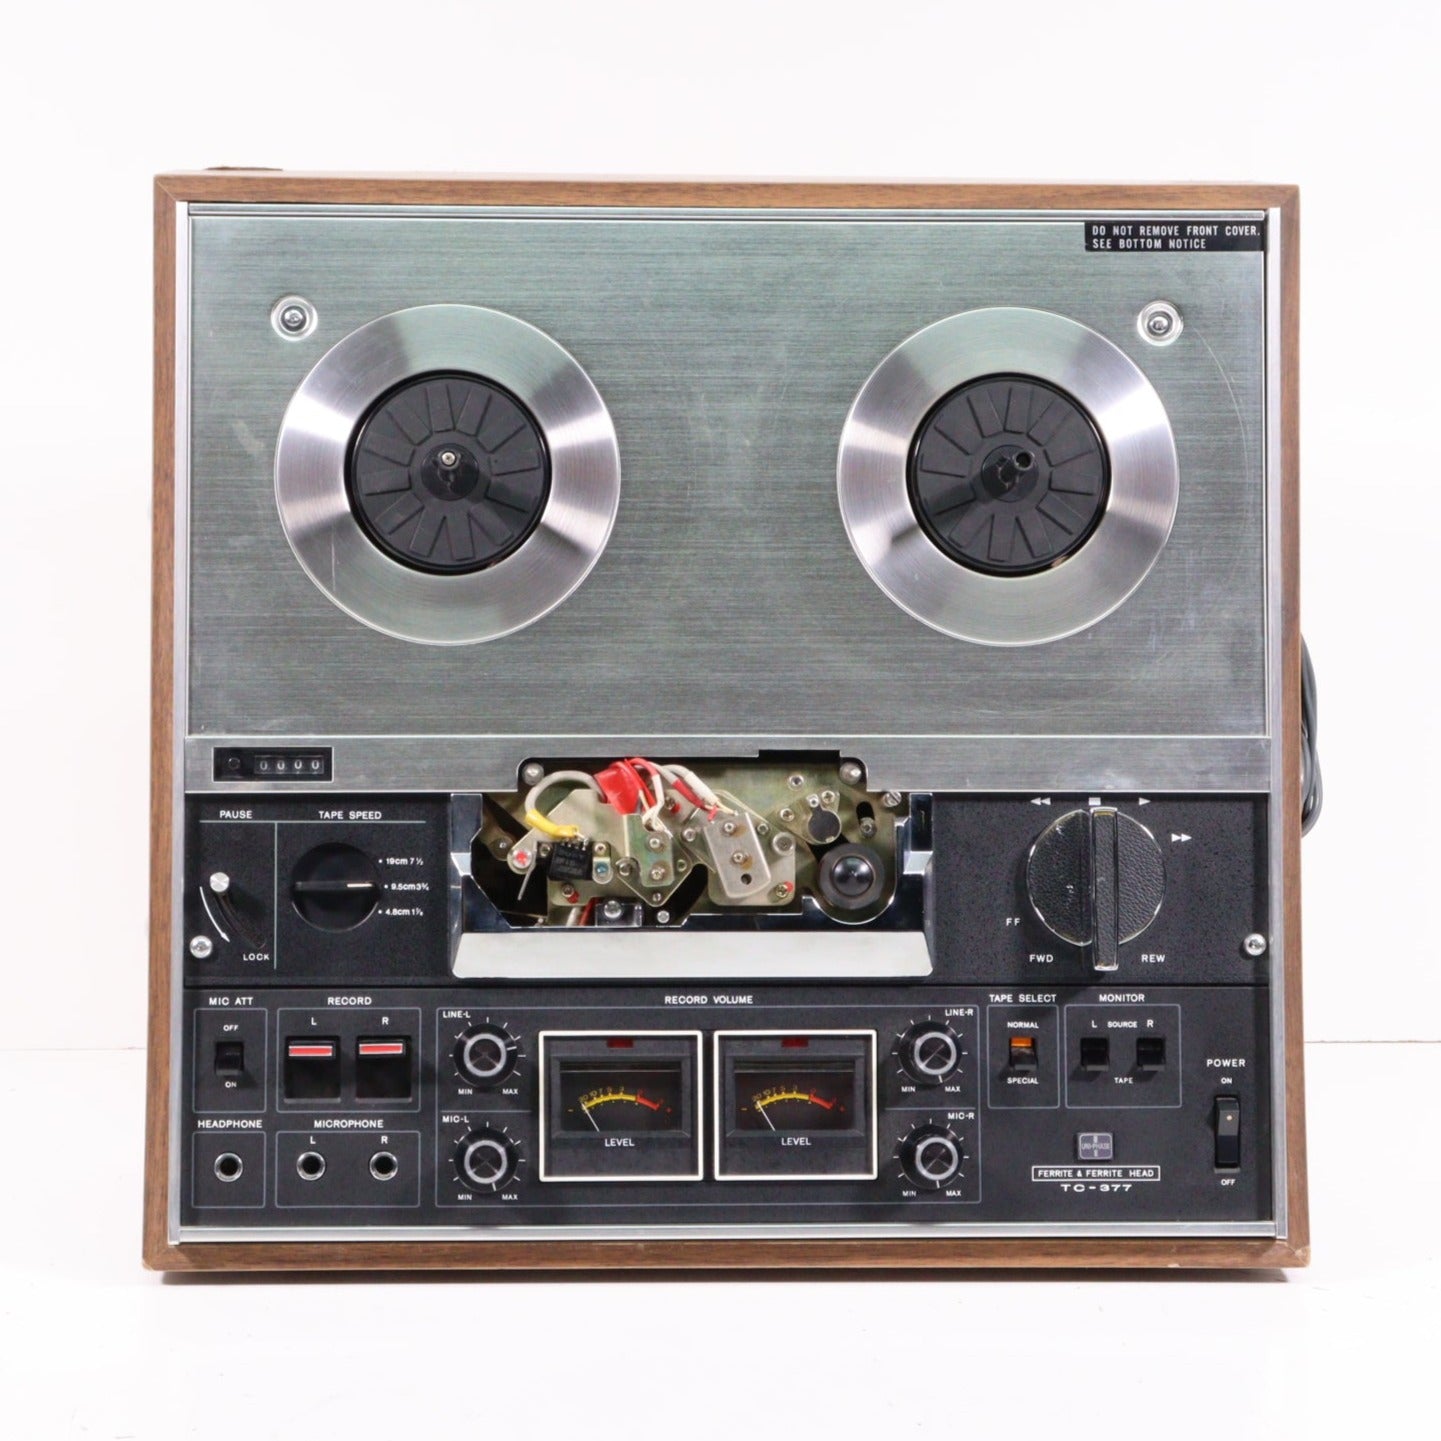 TEAC A-2340R 4 Track, 2 or 4 Channel Reel to Reel with Auto